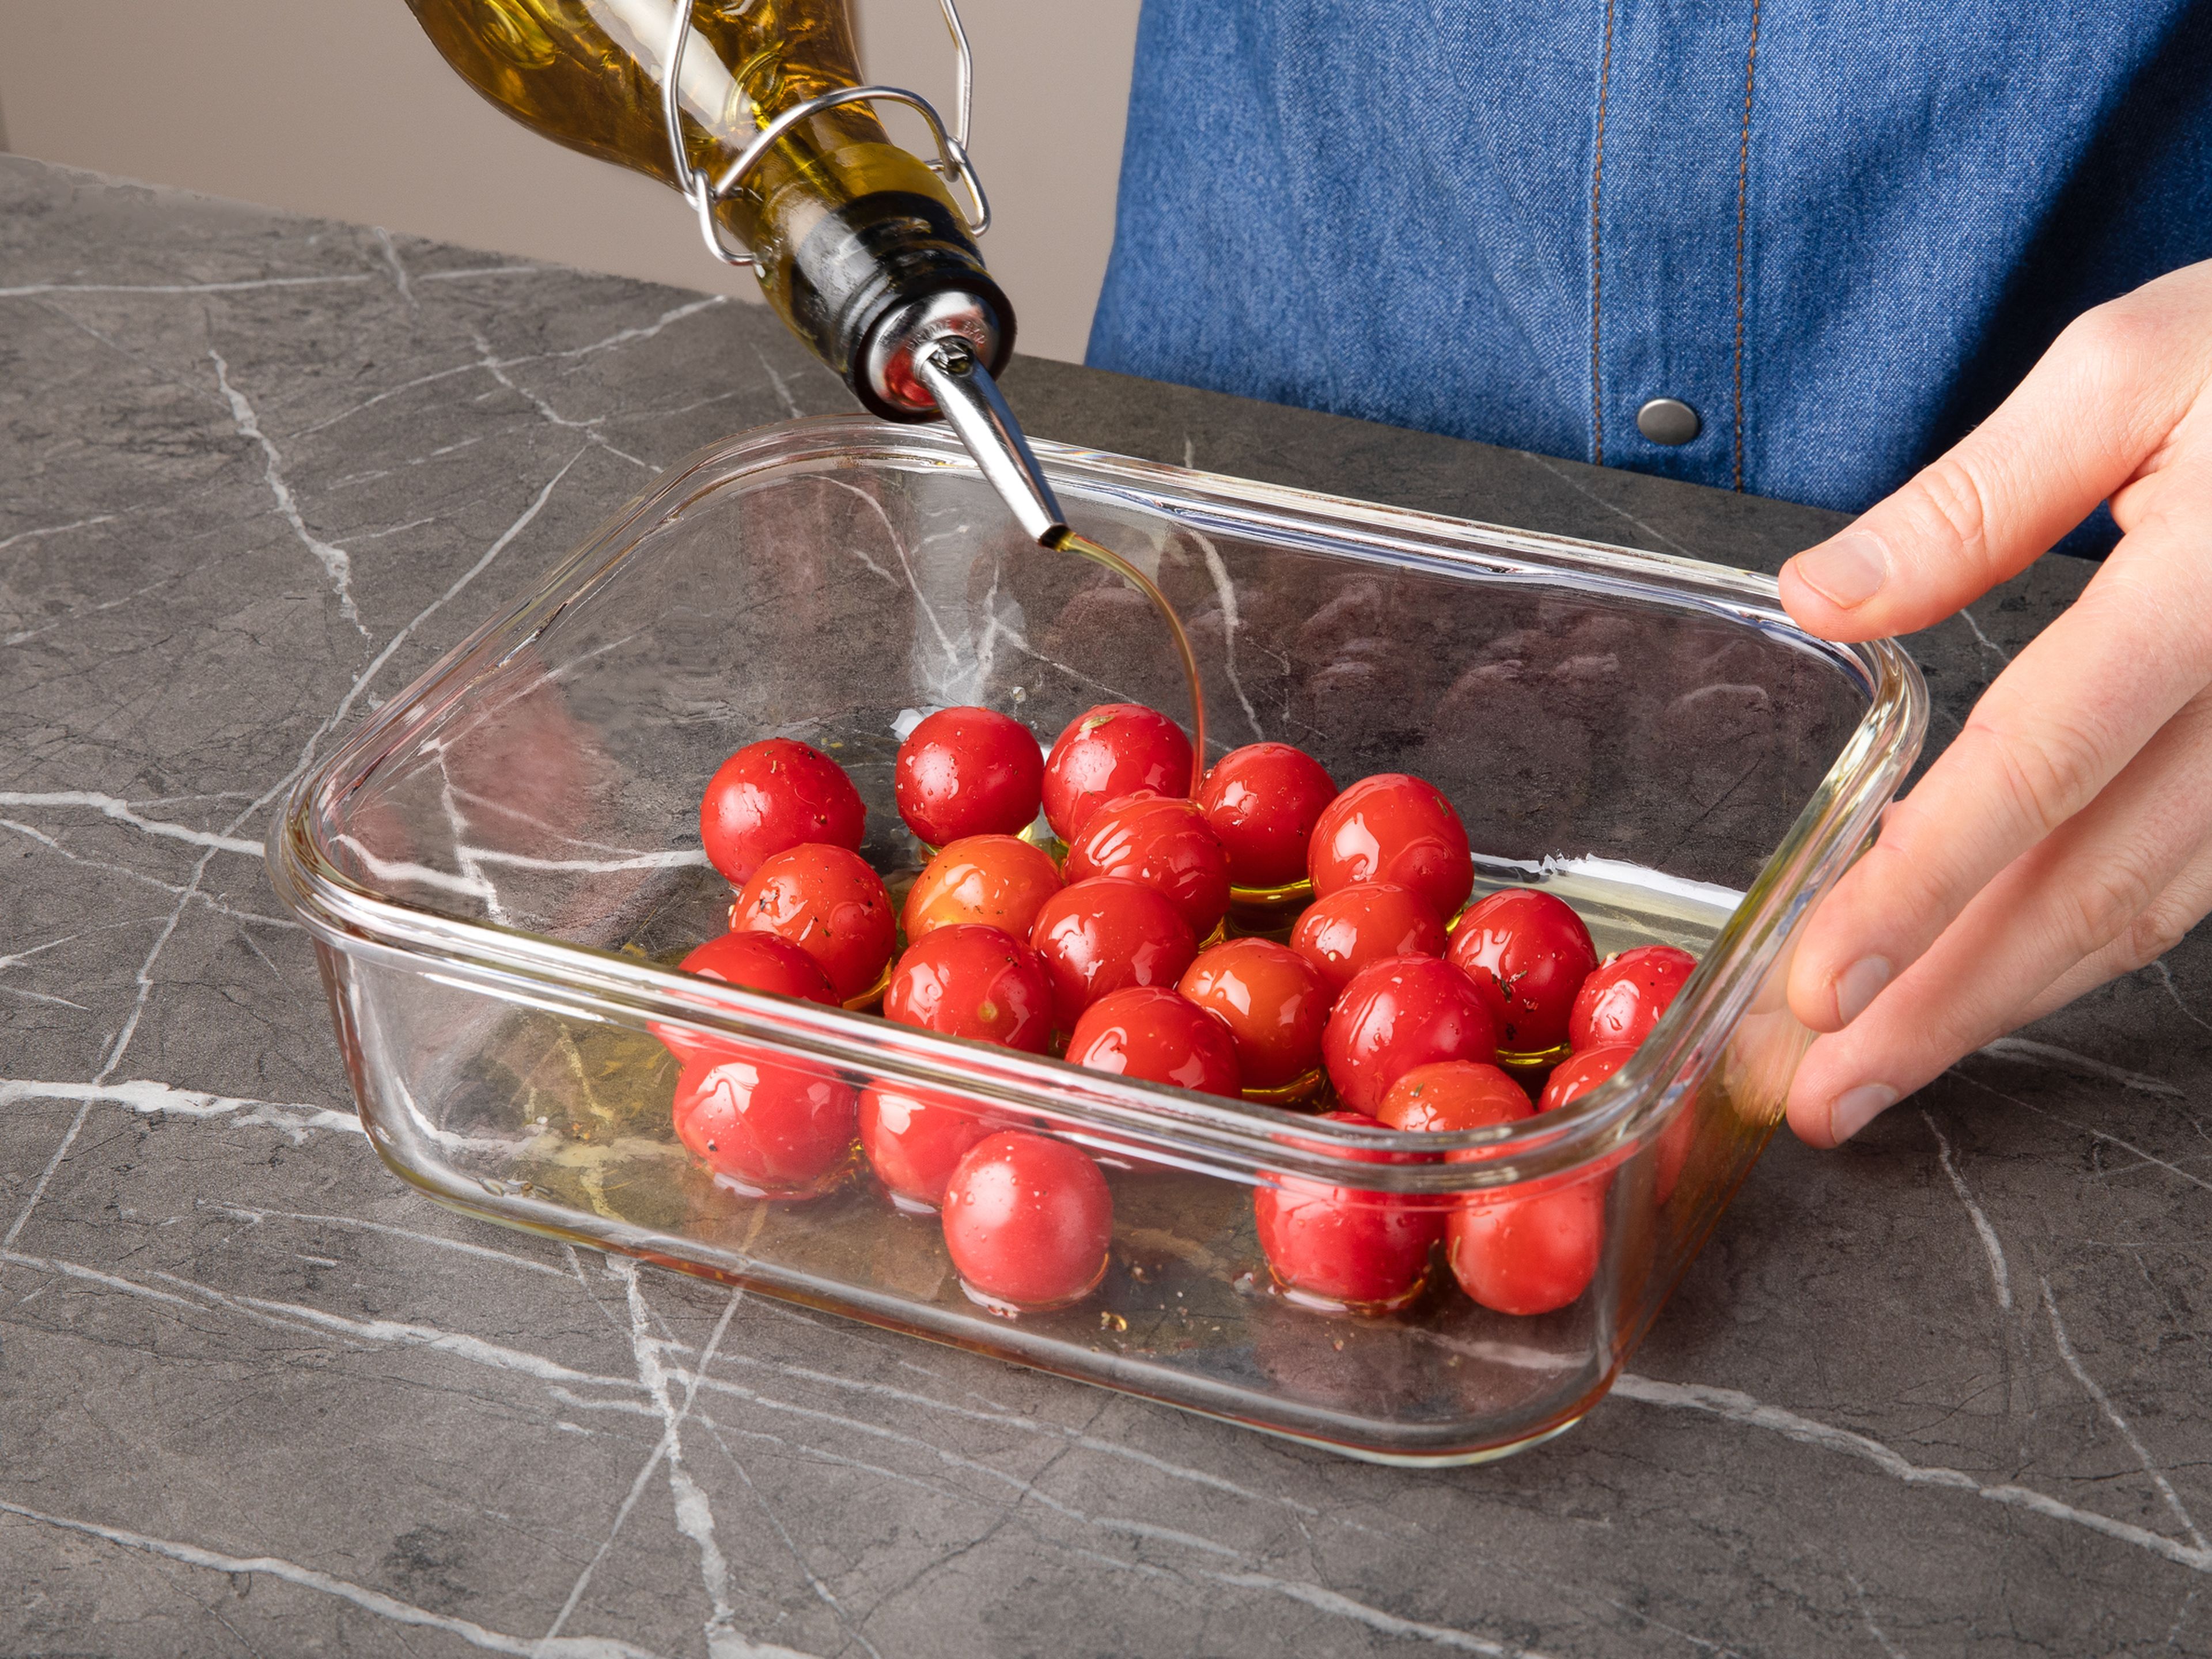 Preheat oven to 220°C/430°F. Place cherry tomatoes in a baking dish along with the olive oil, honey, and thyme sprigs, or our PASTA MAGIE seasoning (if using). Toss well, season with salt and pepper, and transfer to the oven to bake for approx. 20 min. Peel and finely mince garlic. Chop basil into thin ribbons.